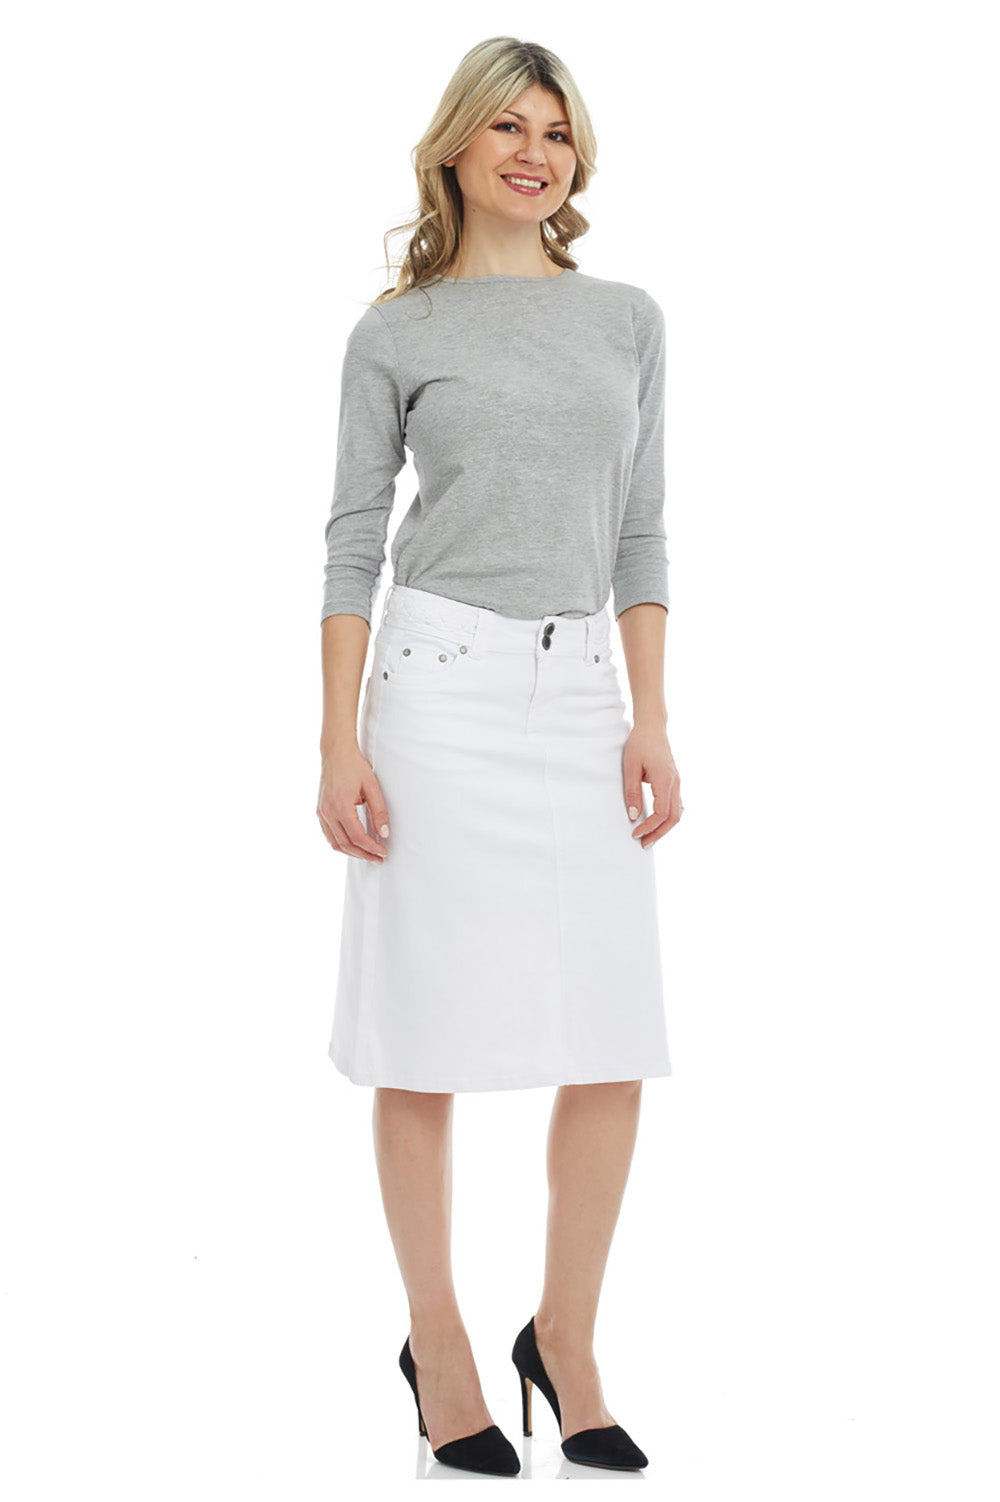 white below the knee classic 5 pocket A-line denim jean skirt with woven braided belt